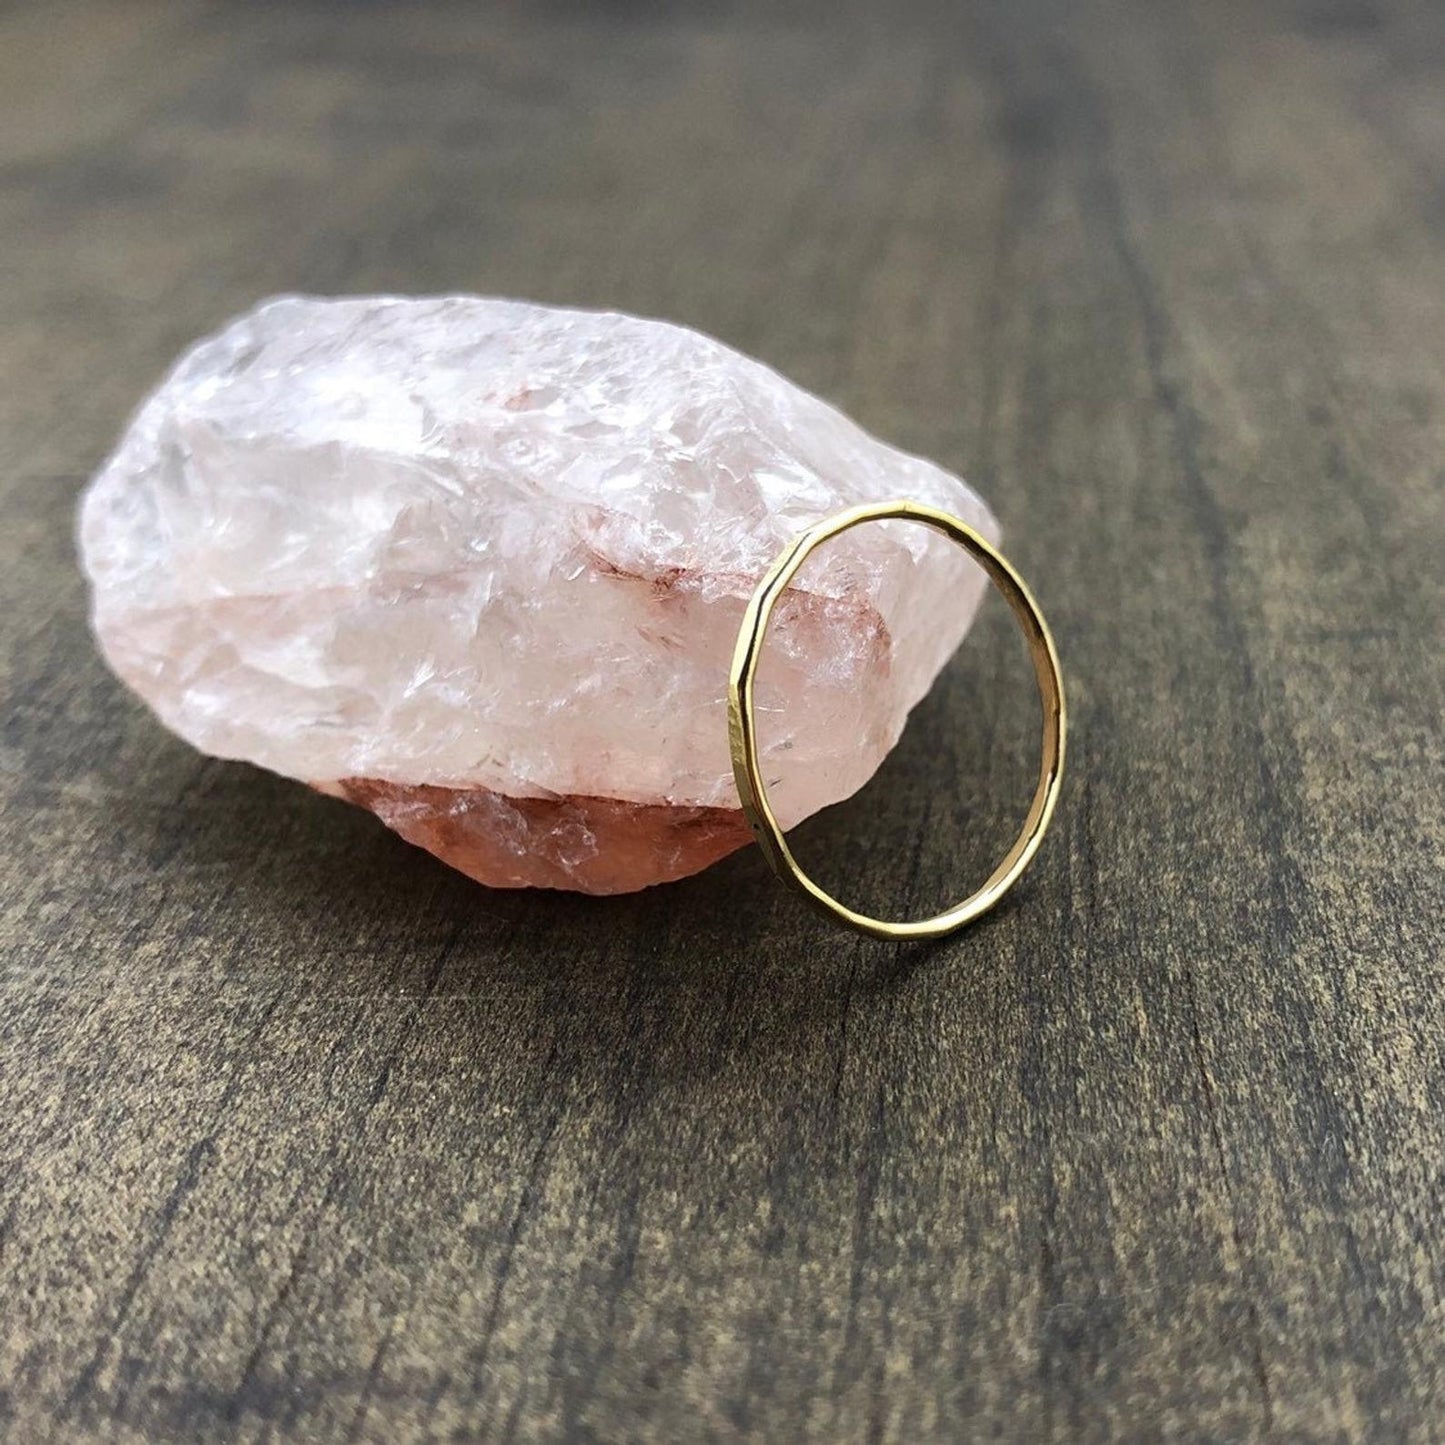 Simple Hammered Ring - Sterling Silver, Gold, Rose Gold Fill